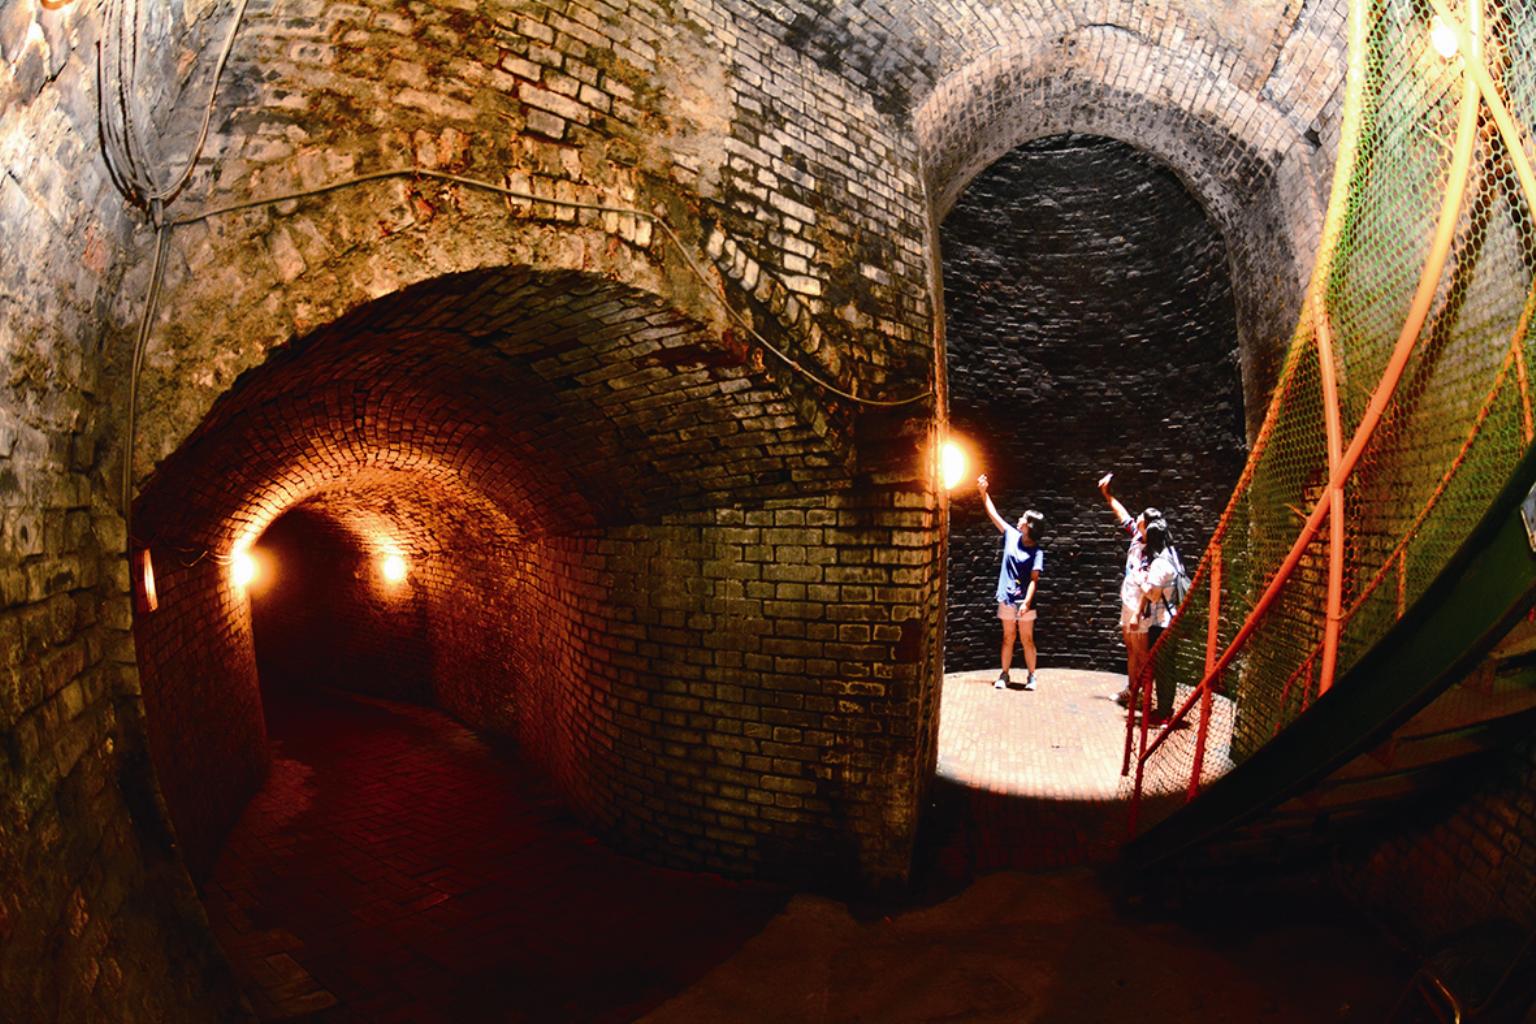 Unique tunnel under the chimney of Yuemei Sugar Factory.